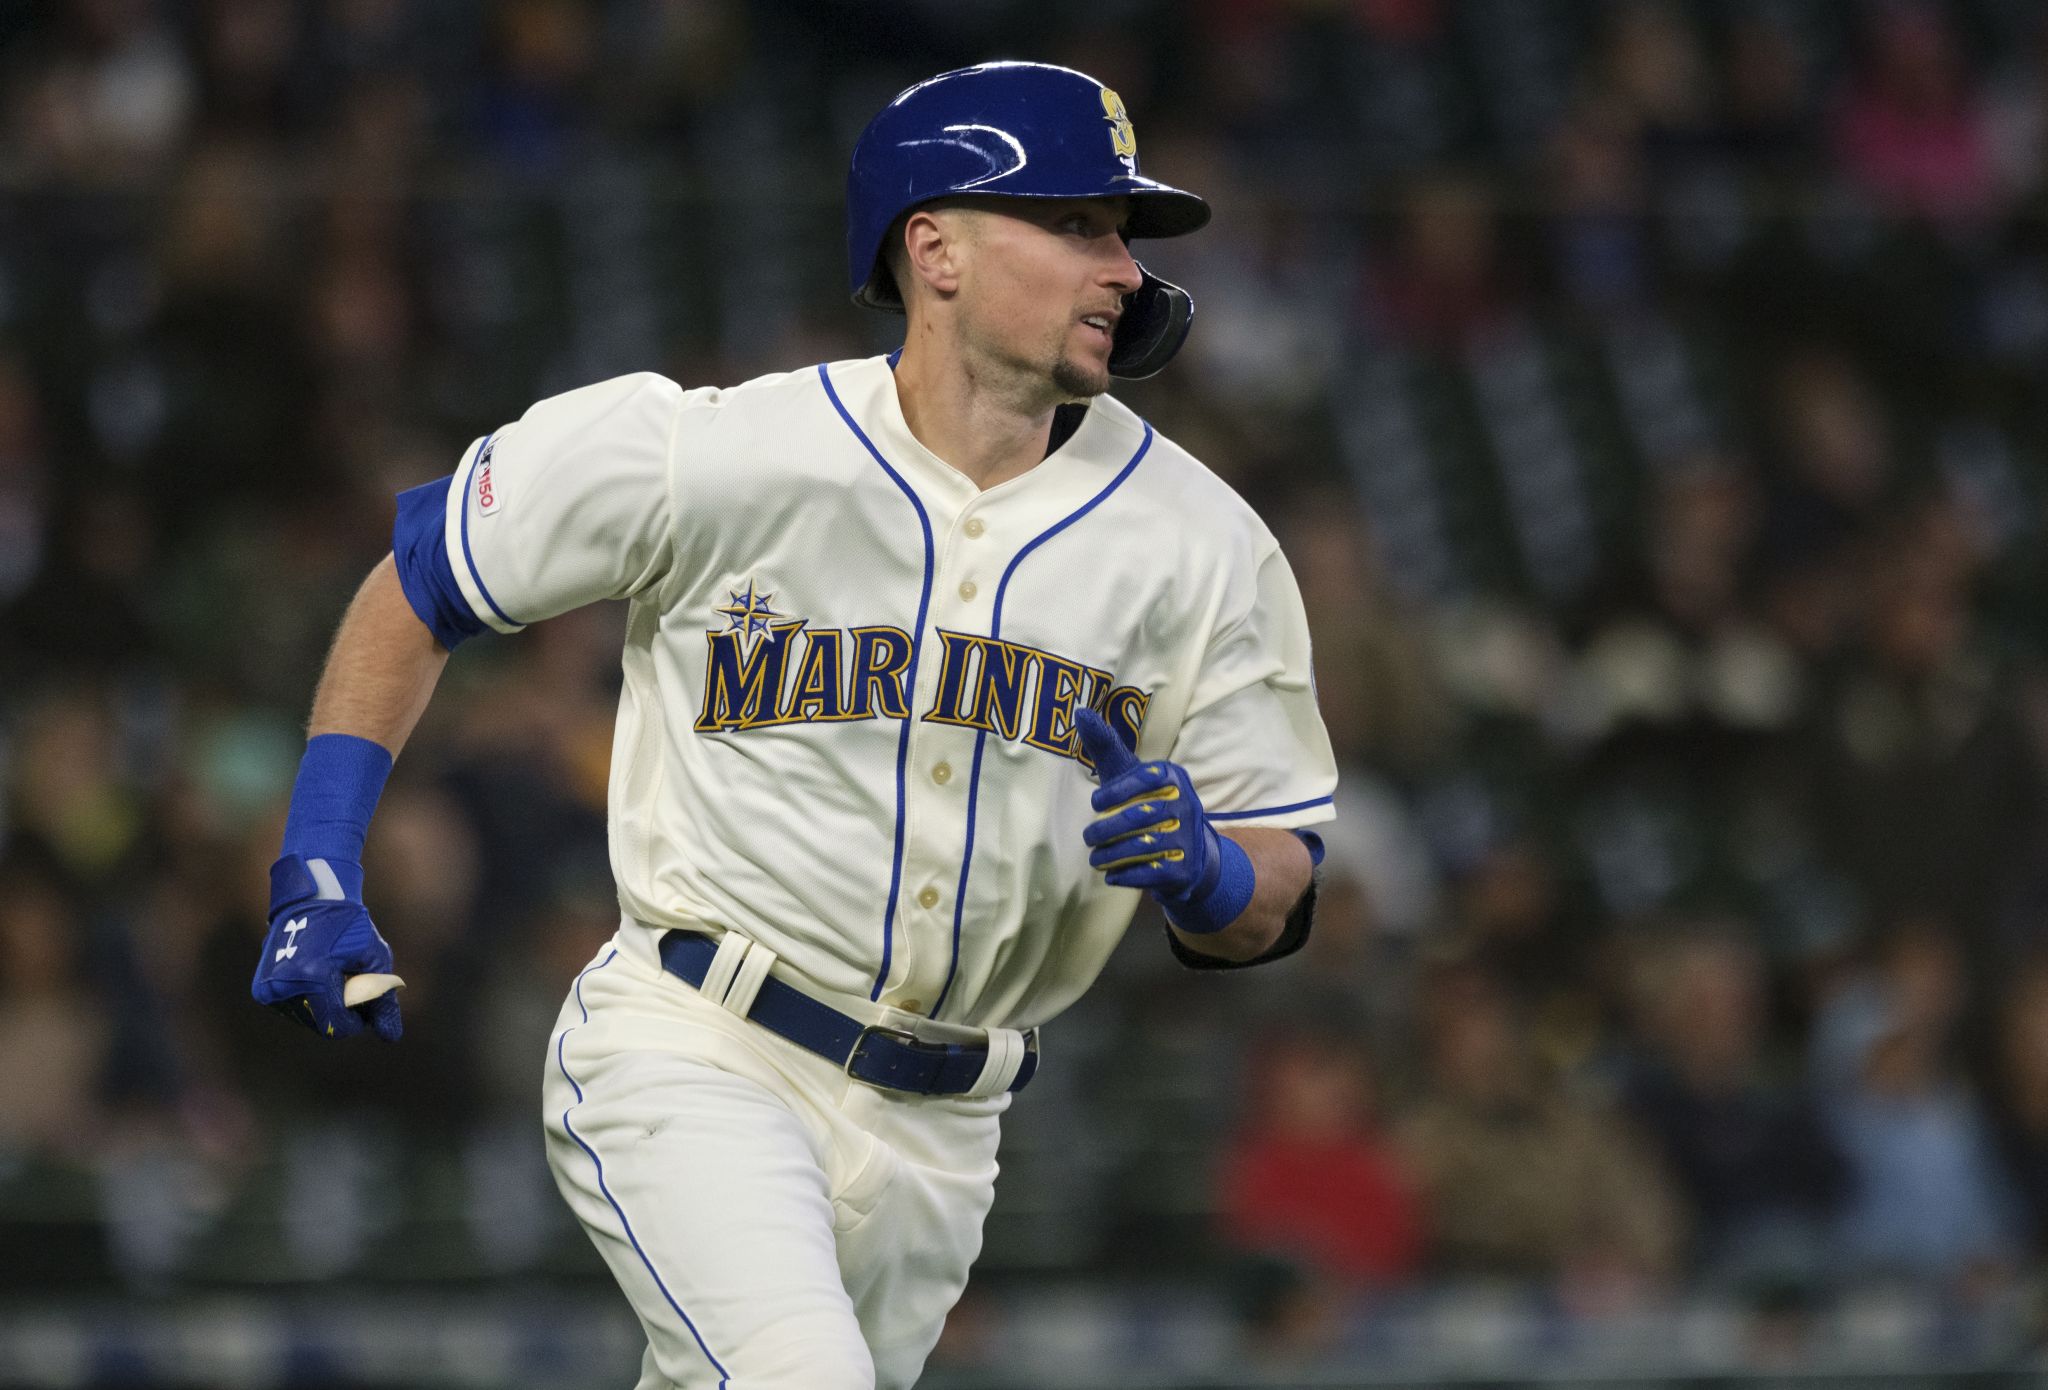 Mariners outfielder Braden Bishop to wear Dick's cleats to support  Washington firefighters